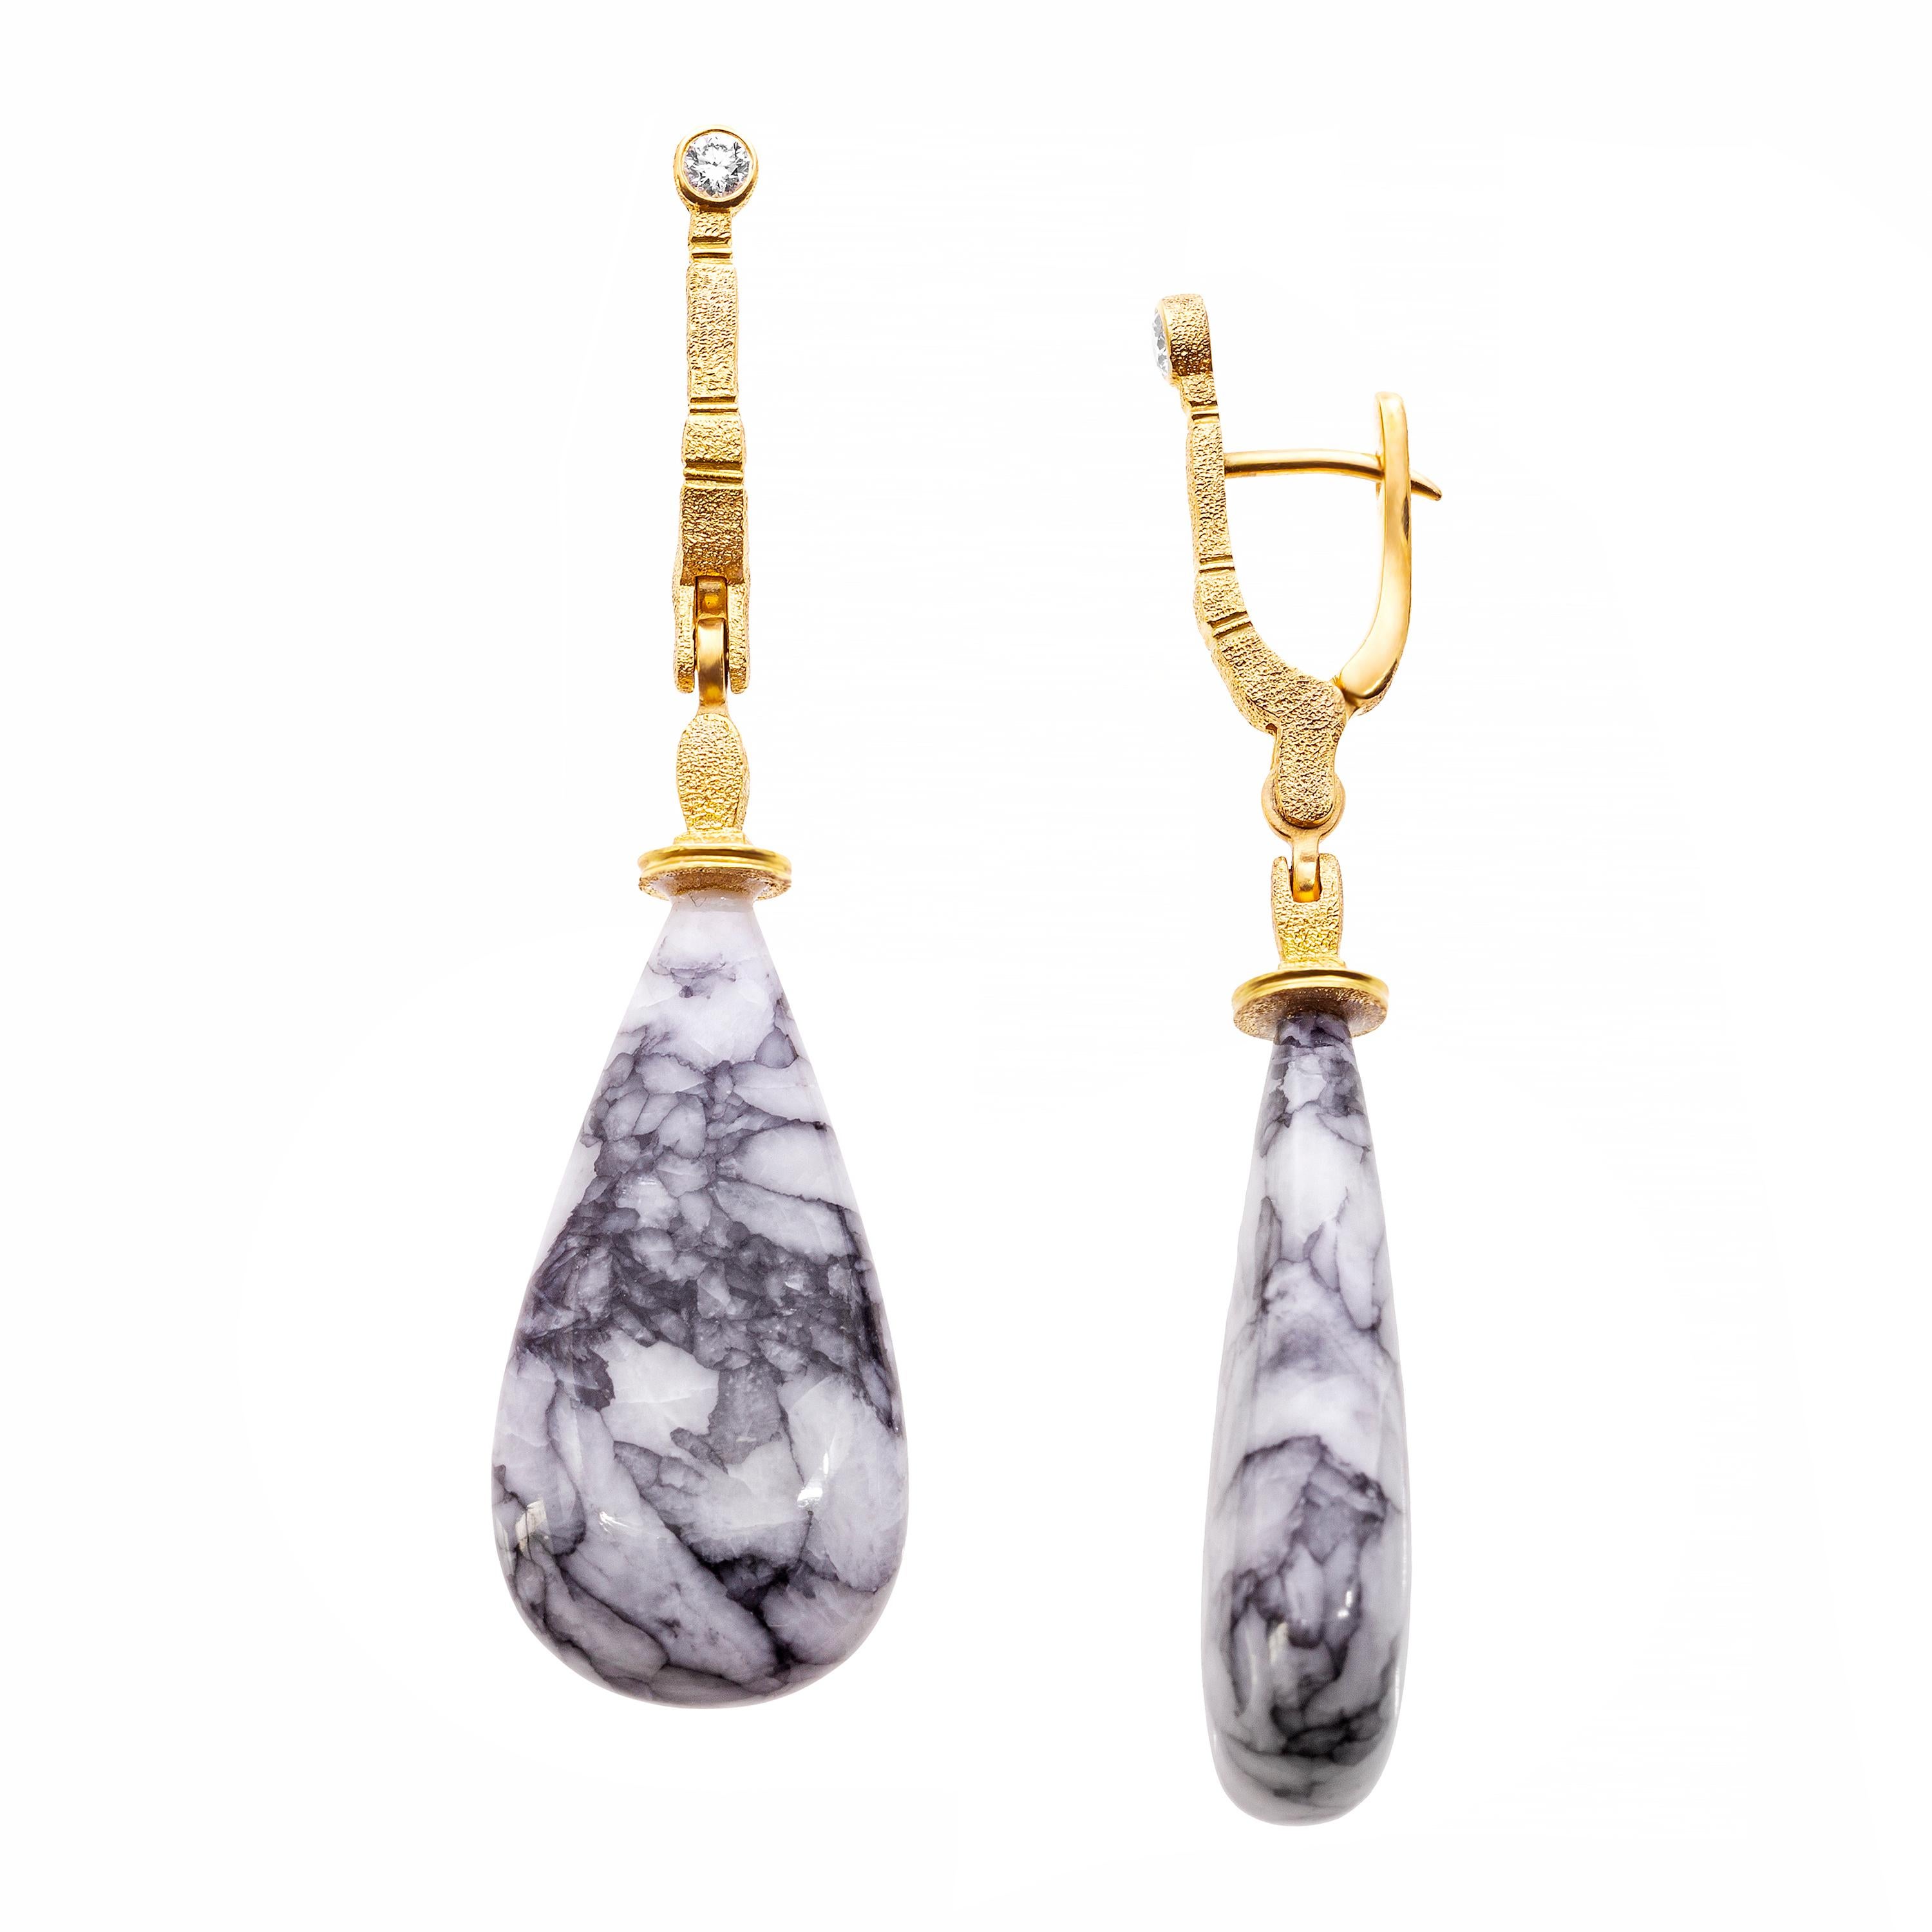 Brilliant Cut Alex Sepkus 18 Karat Yellow Gold Sticks and Stones Earrings with Pinolite Drops For Sale